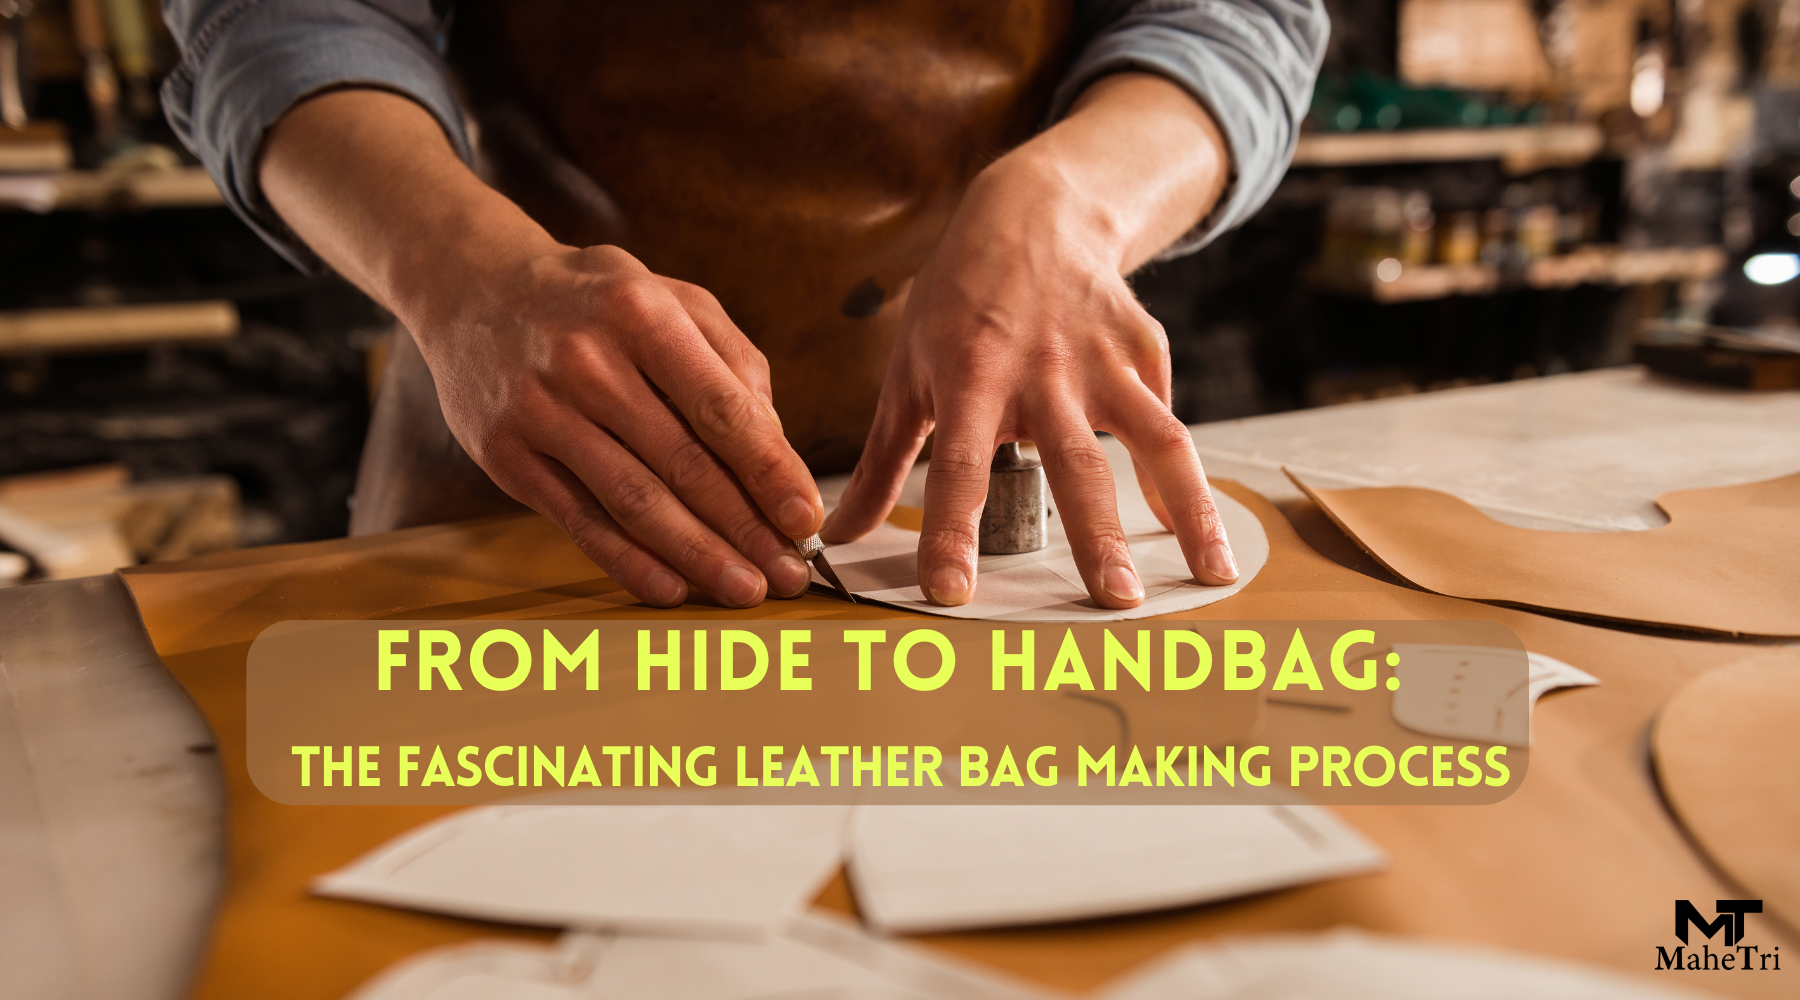 From Hide to Handbag: The Fascinating Leather Bag Making Process